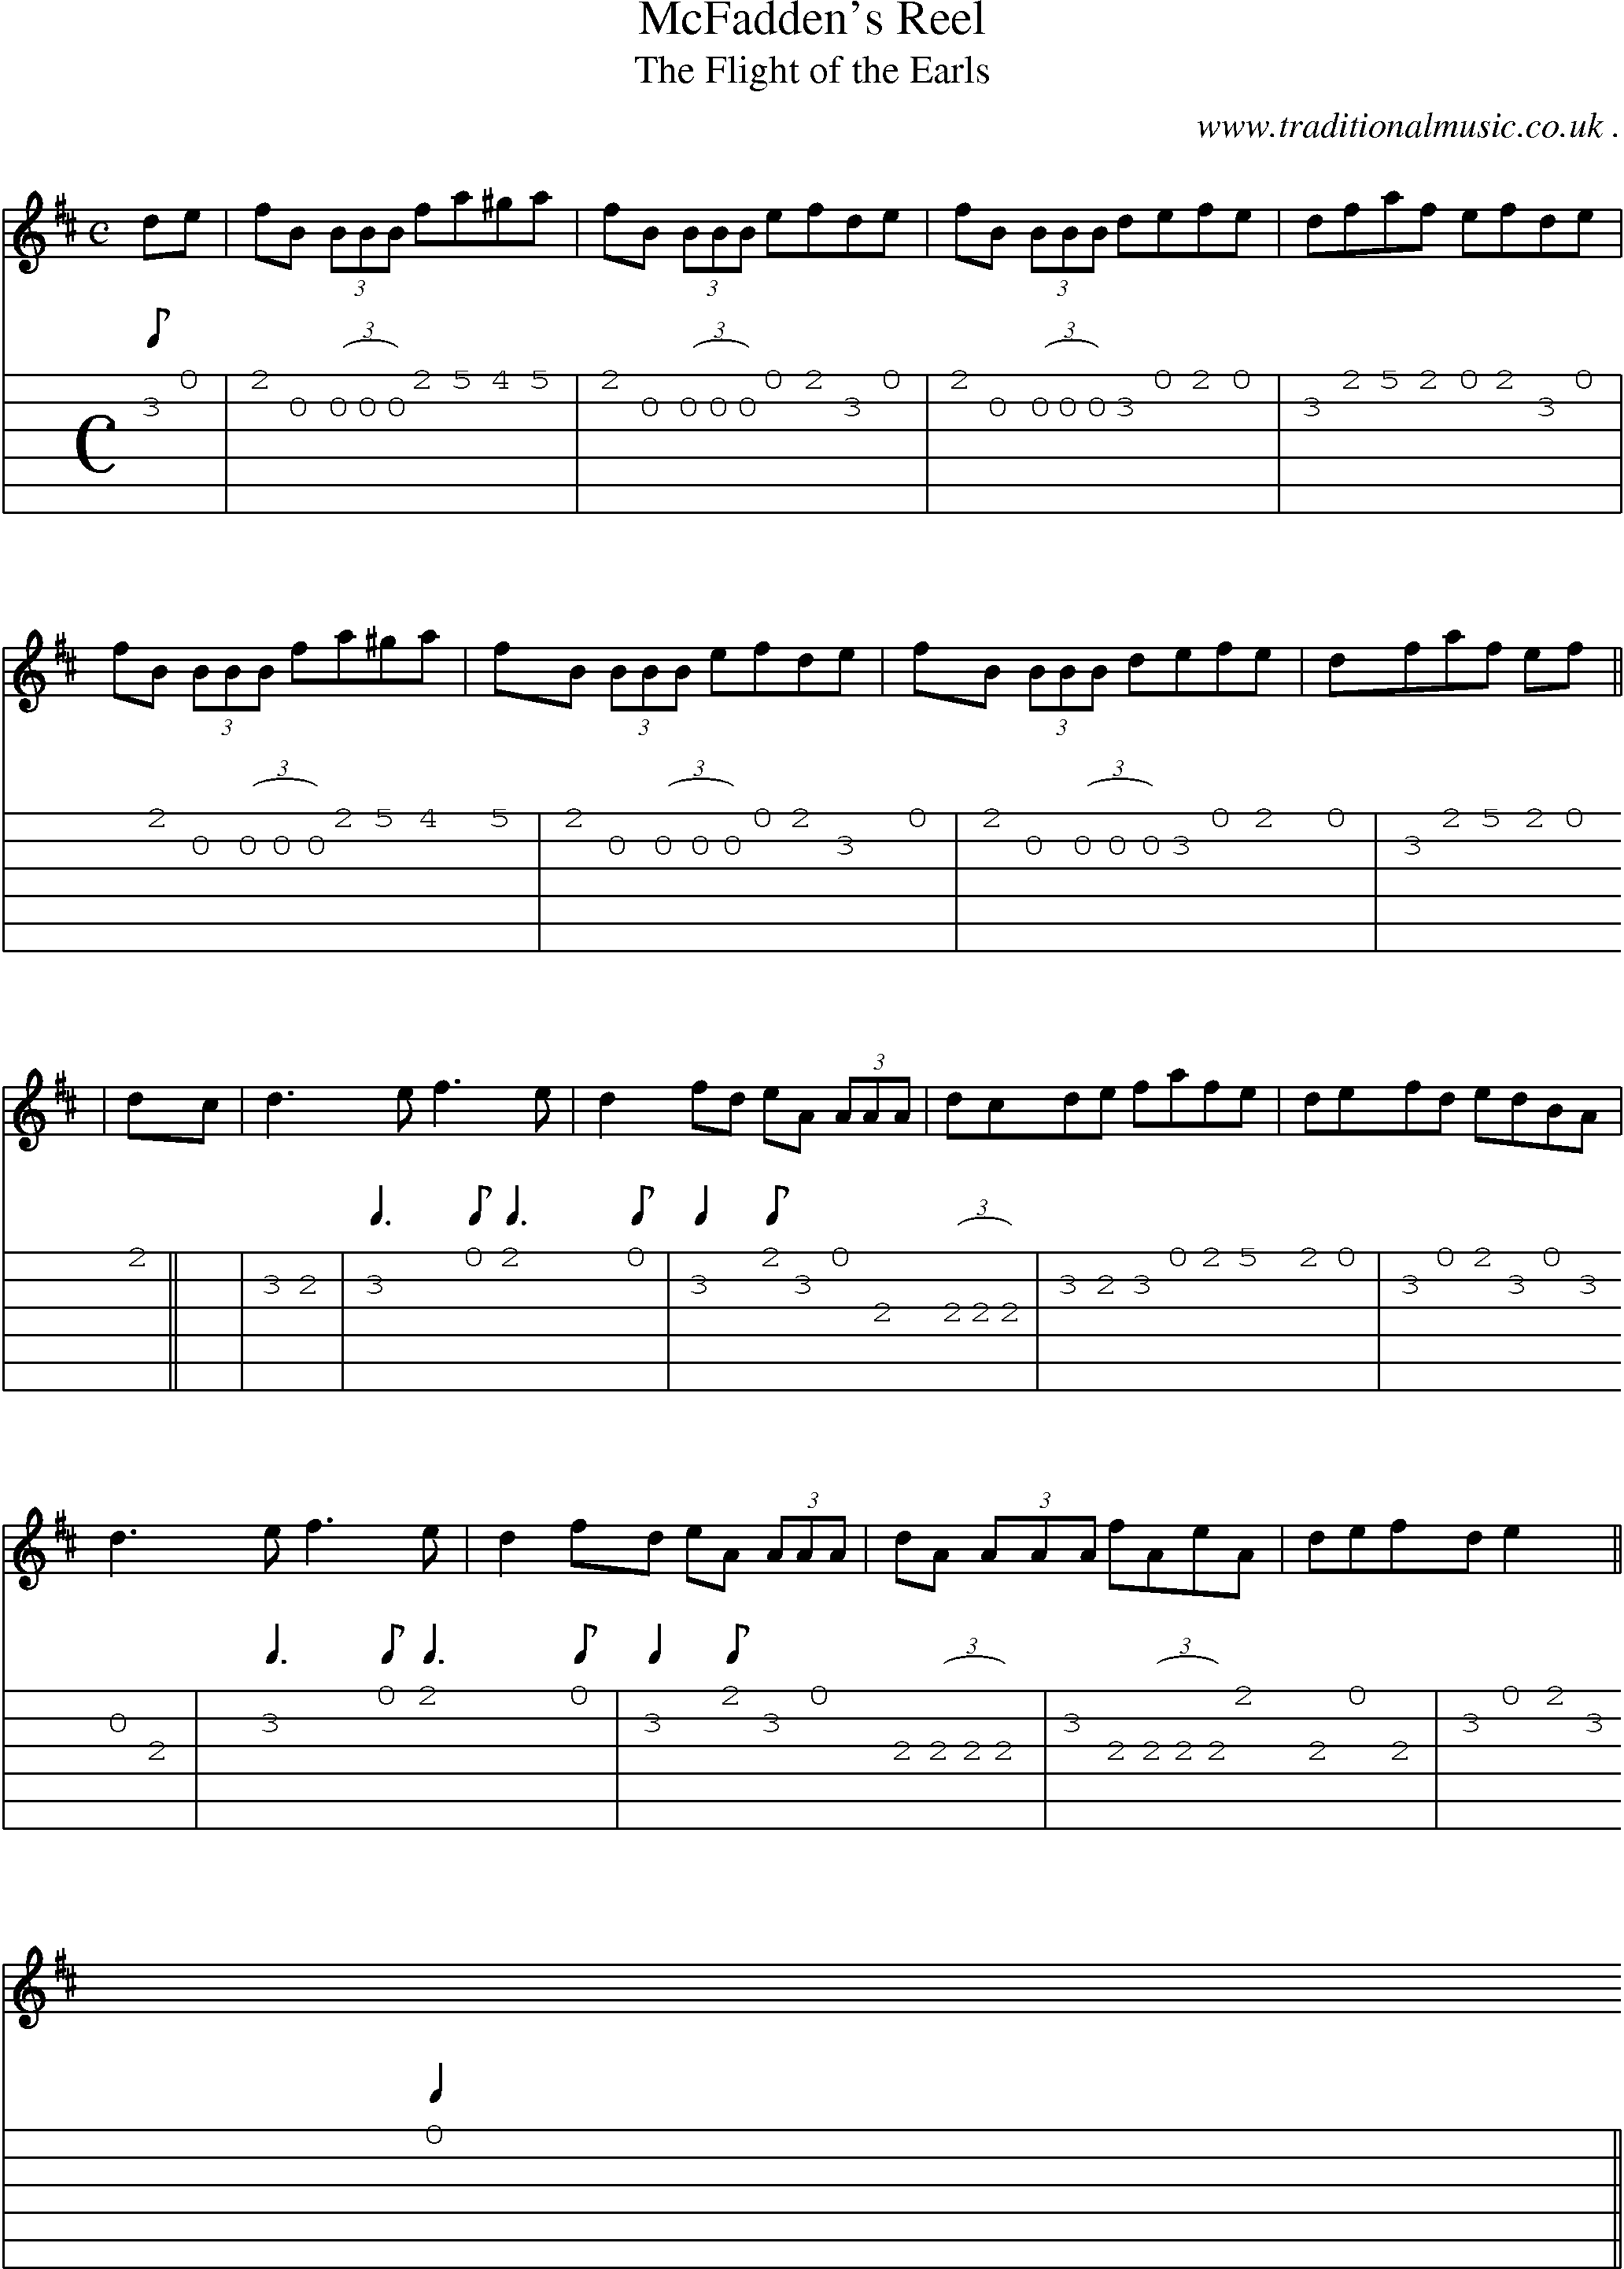 Sheet-music  score, Chords and Guitar Tabs for Mcfaddens Reel